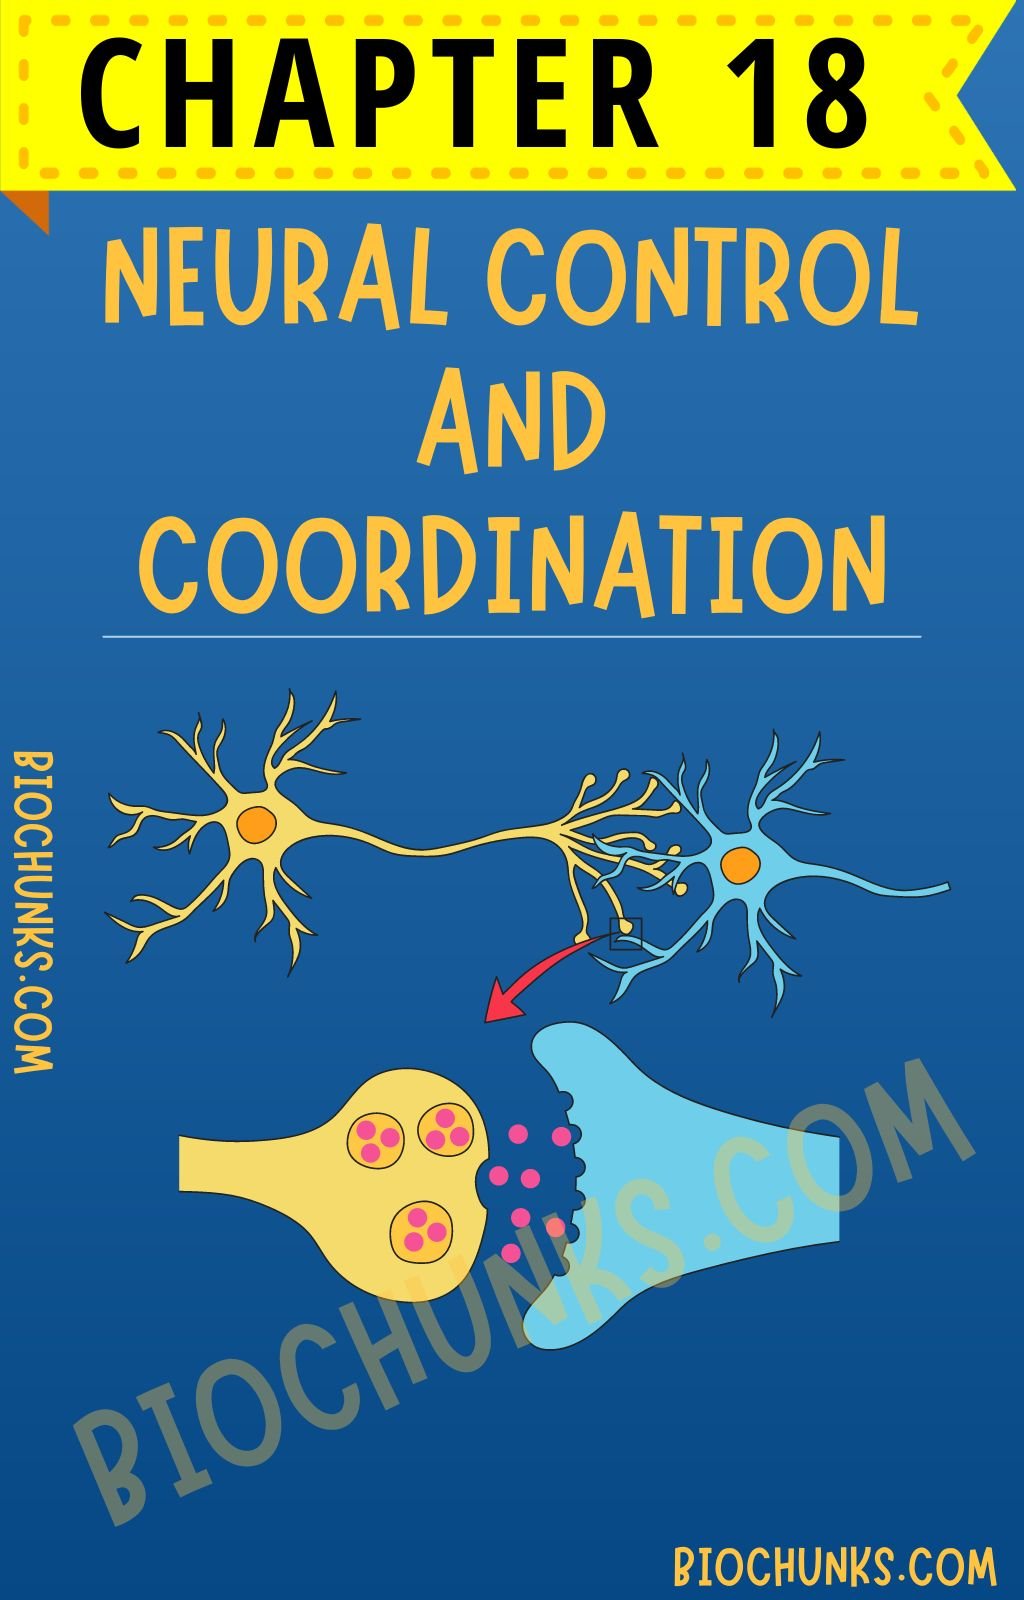 Neural Control and Coordination Chapter 18 Class 11th biochunks.com